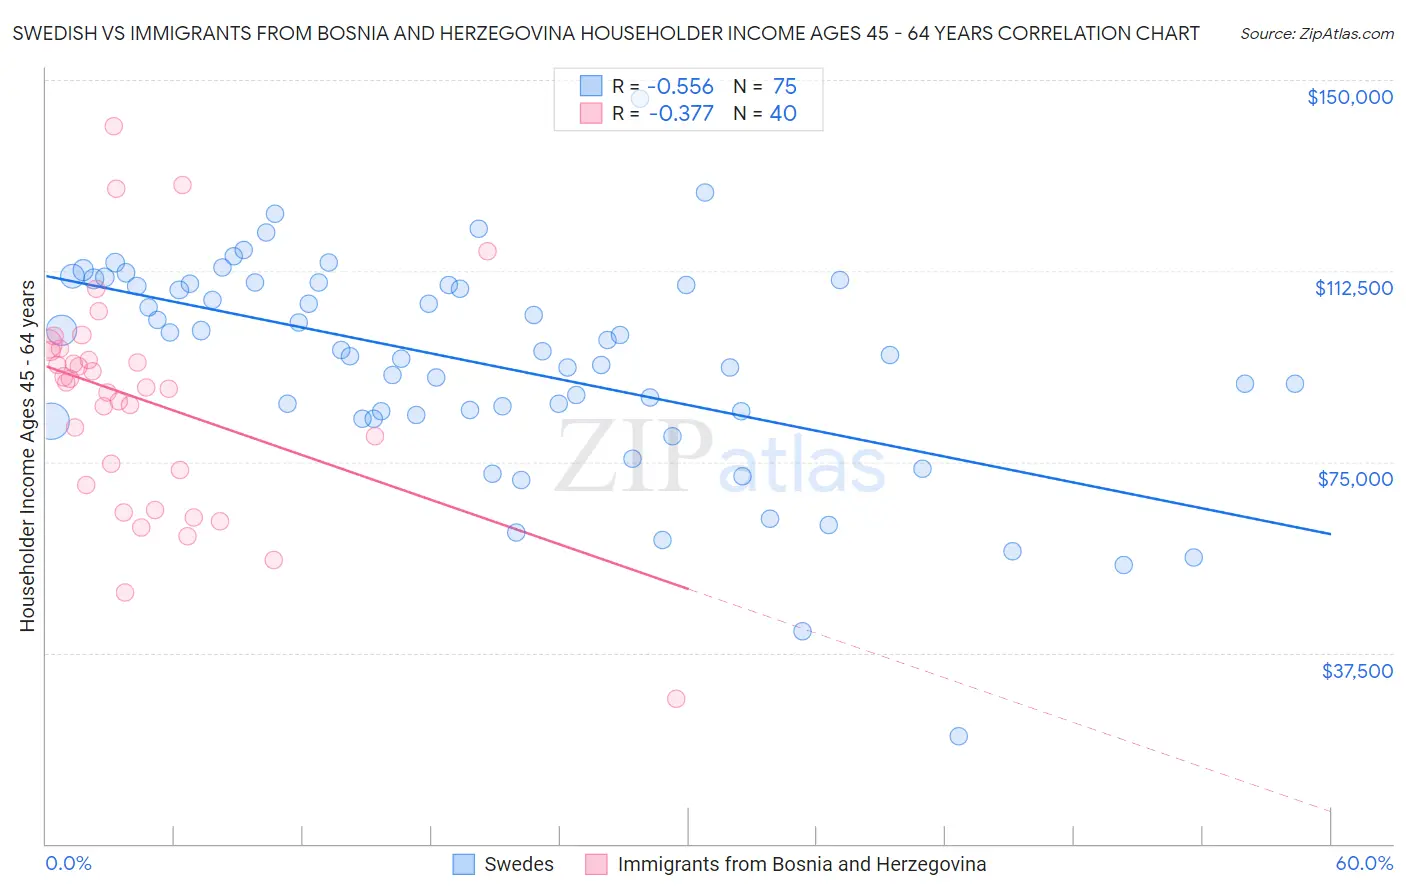 Swedish vs Immigrants from Bosnia and Herzegovina Householder Income Ages 45 - 64 years